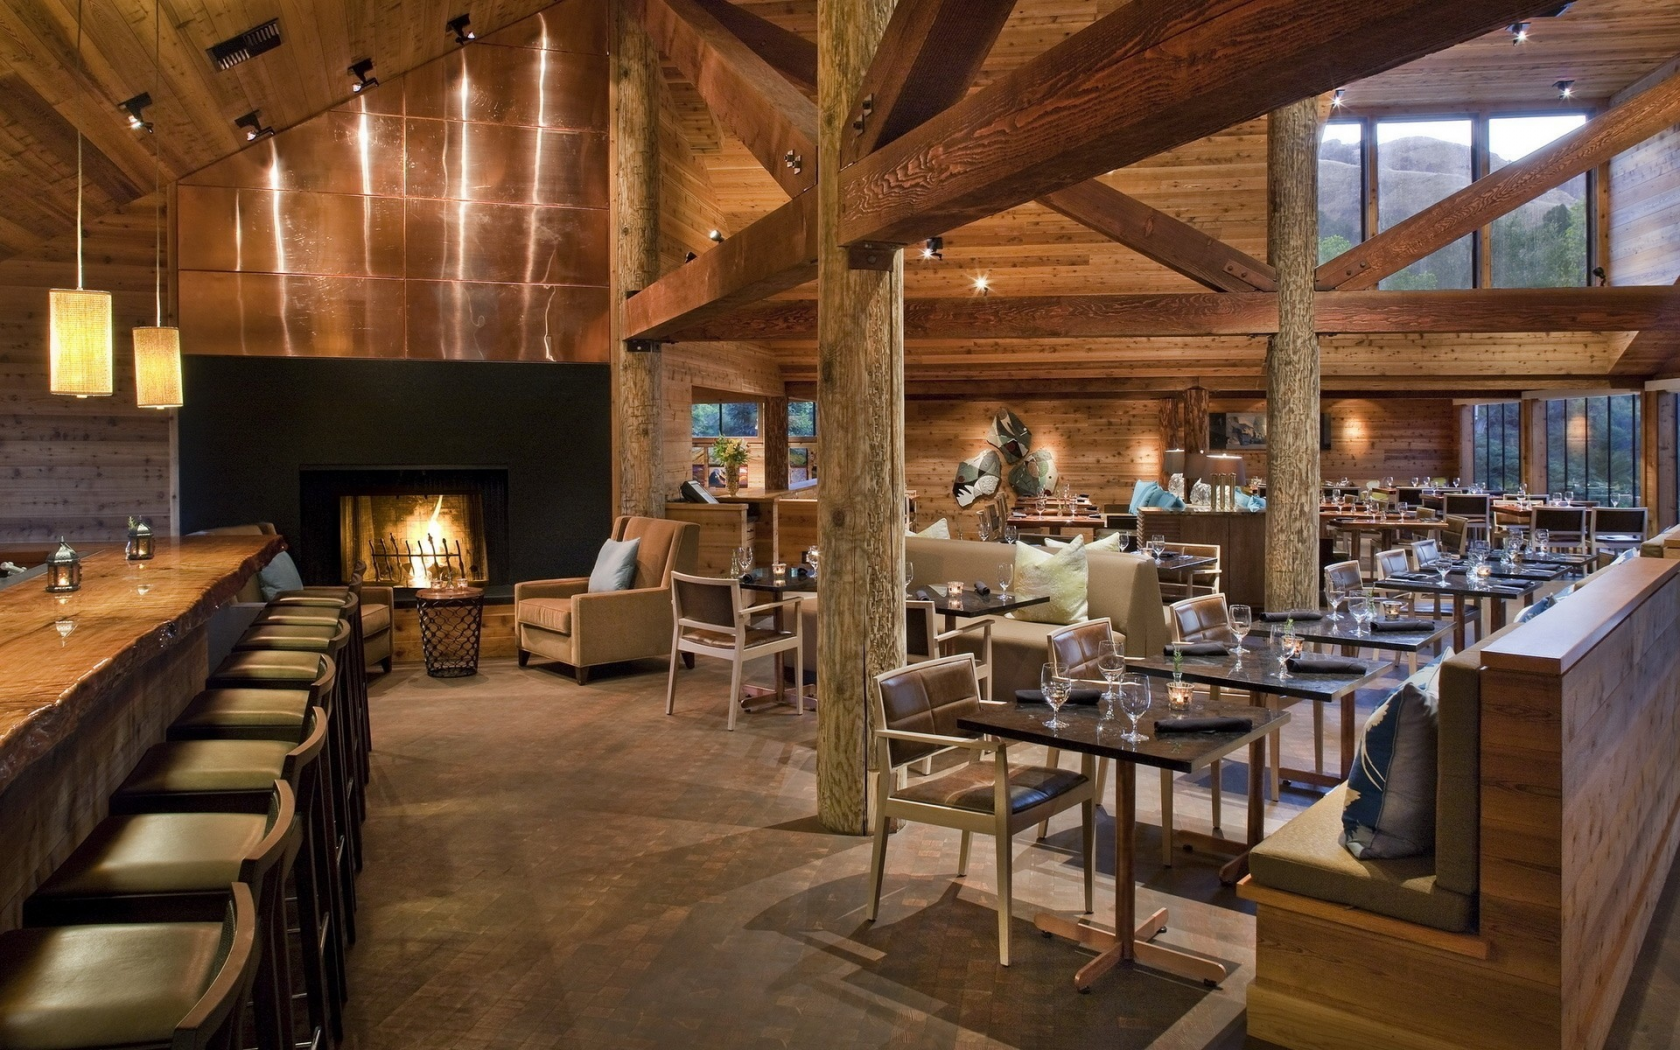 fireplace, chairs, bar, lights, tables, wine glasses, wood